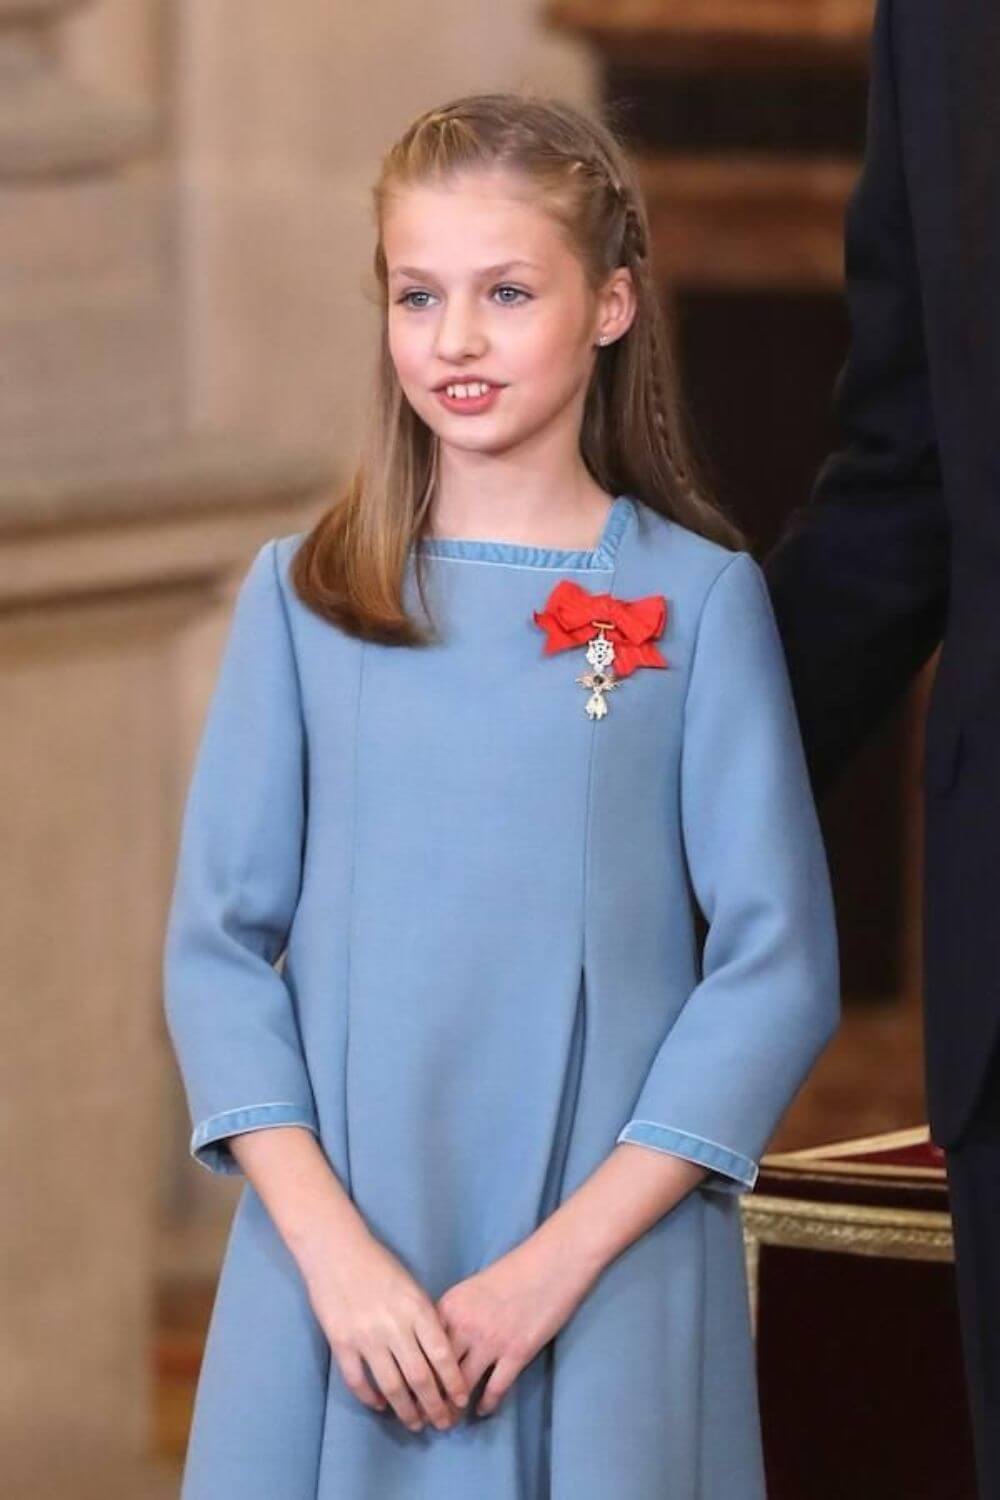 Princess Leonor in a blue dress at a royal event